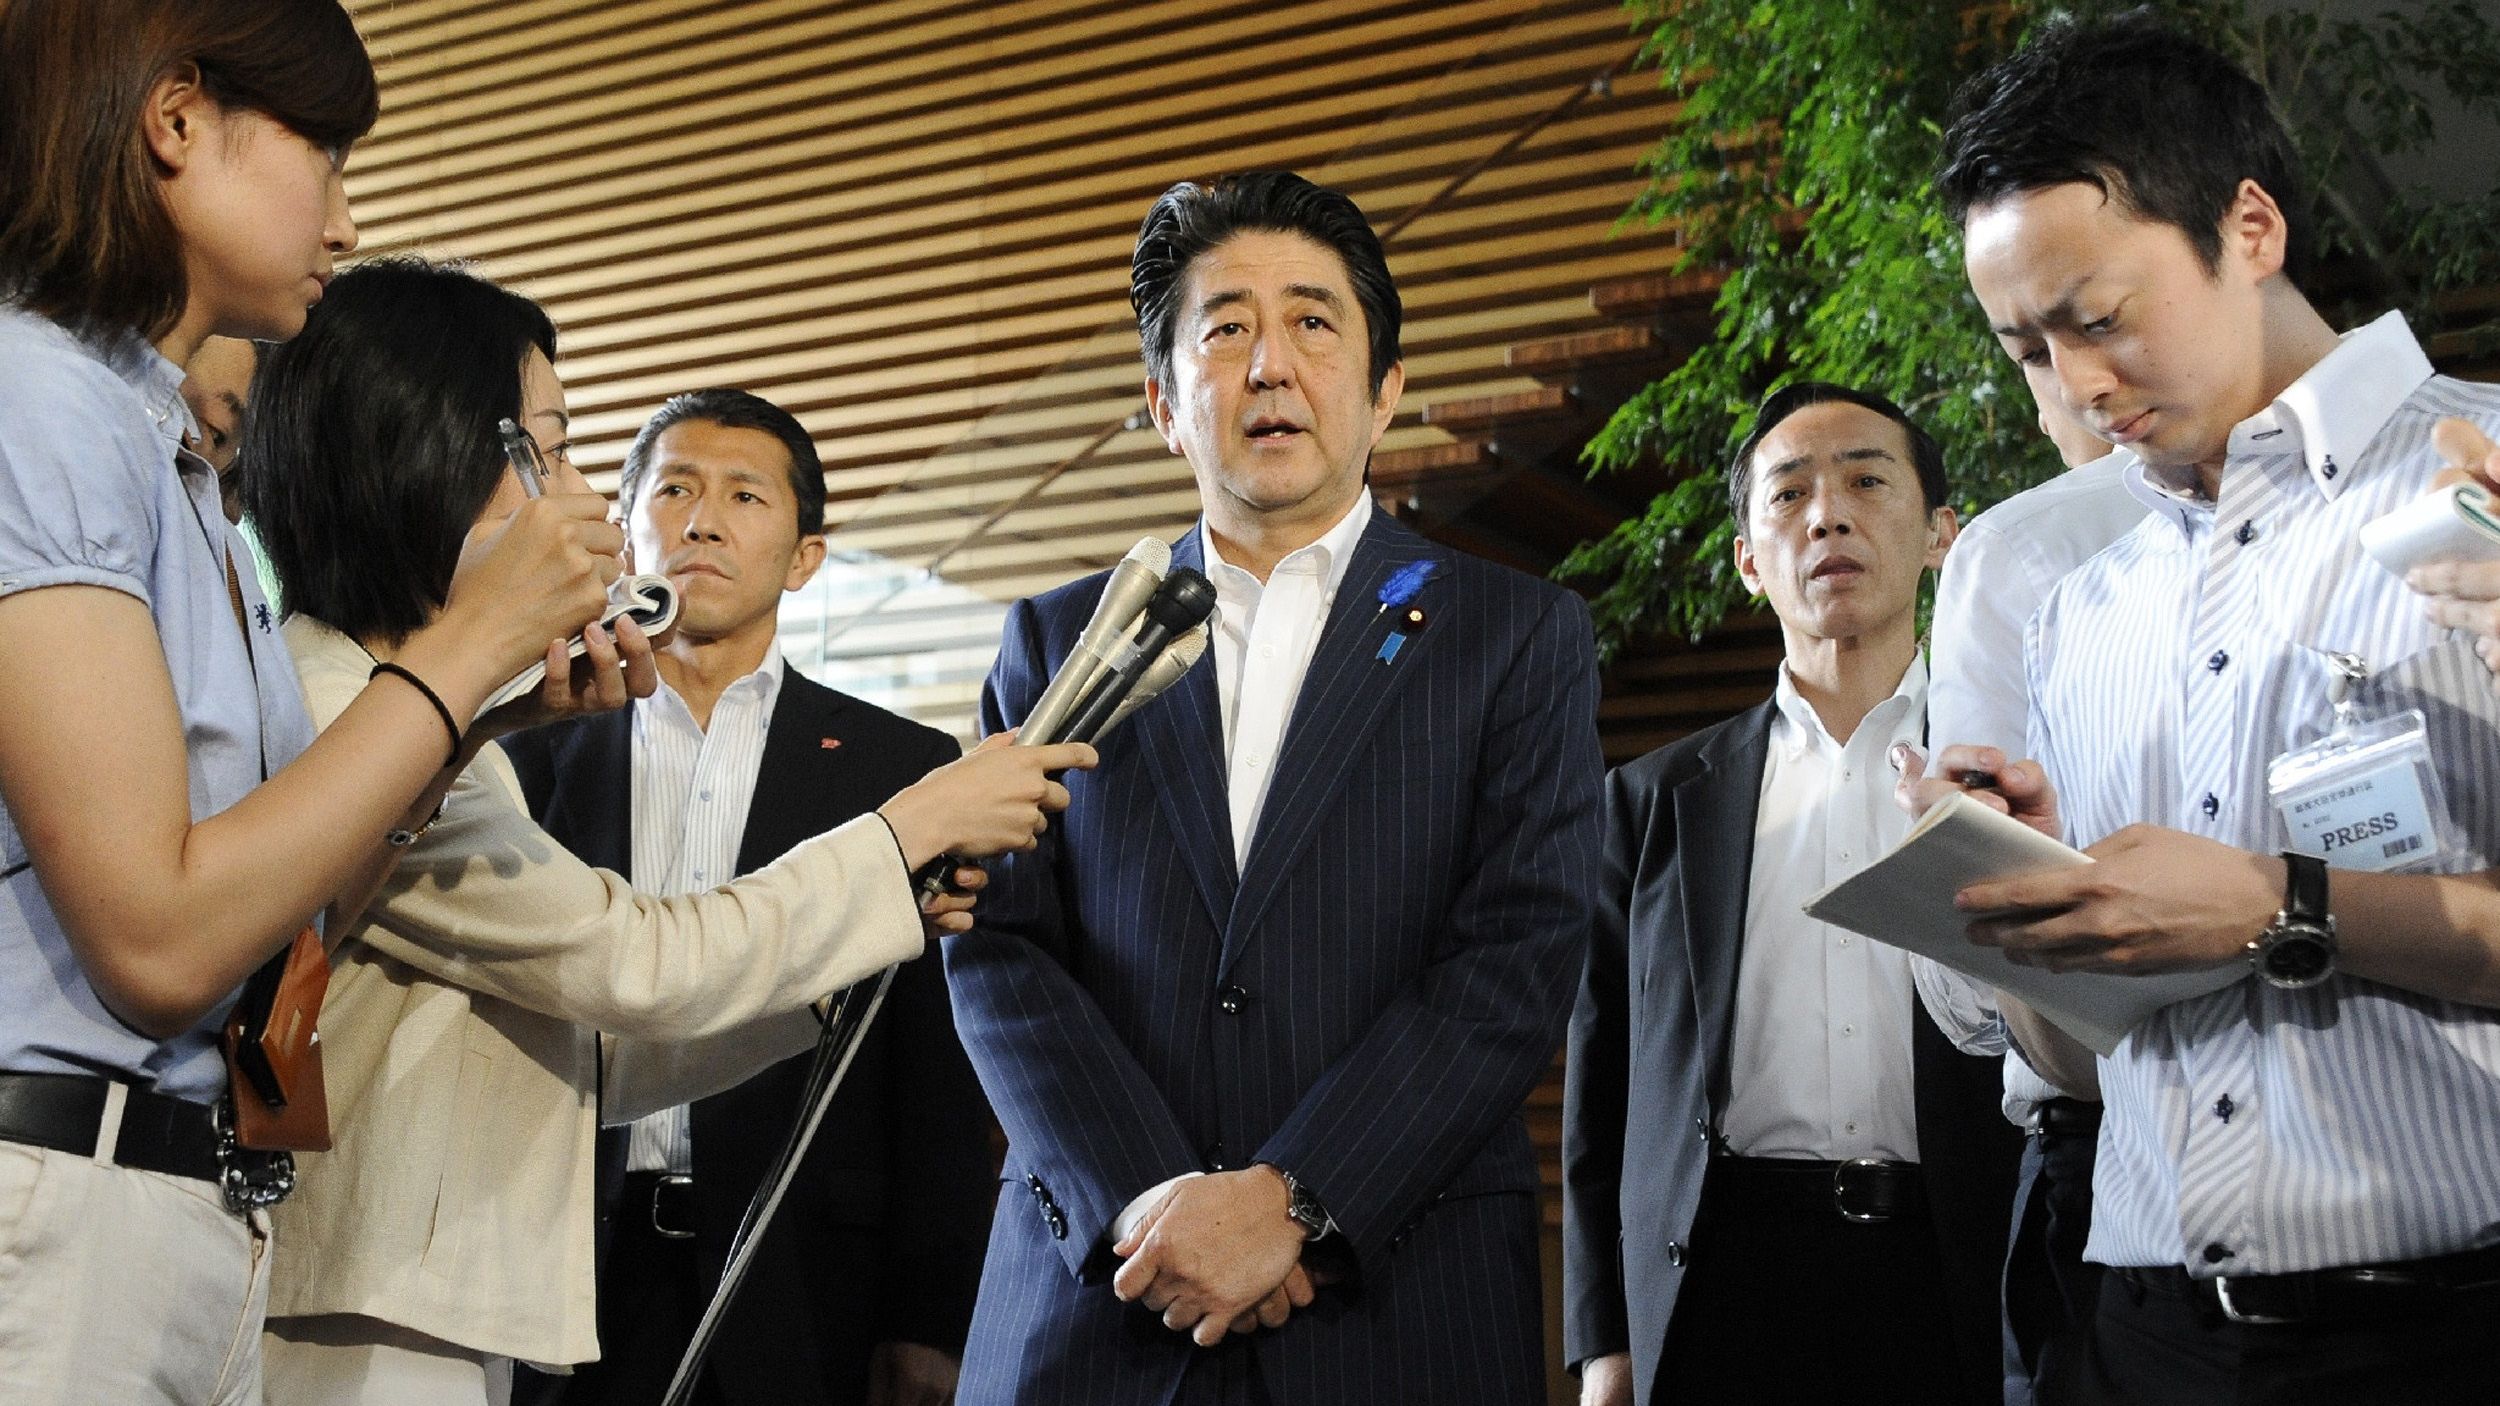 Japanese Prime Minister Shinzo Abe lays out his goals for the upcoming G7 summit.